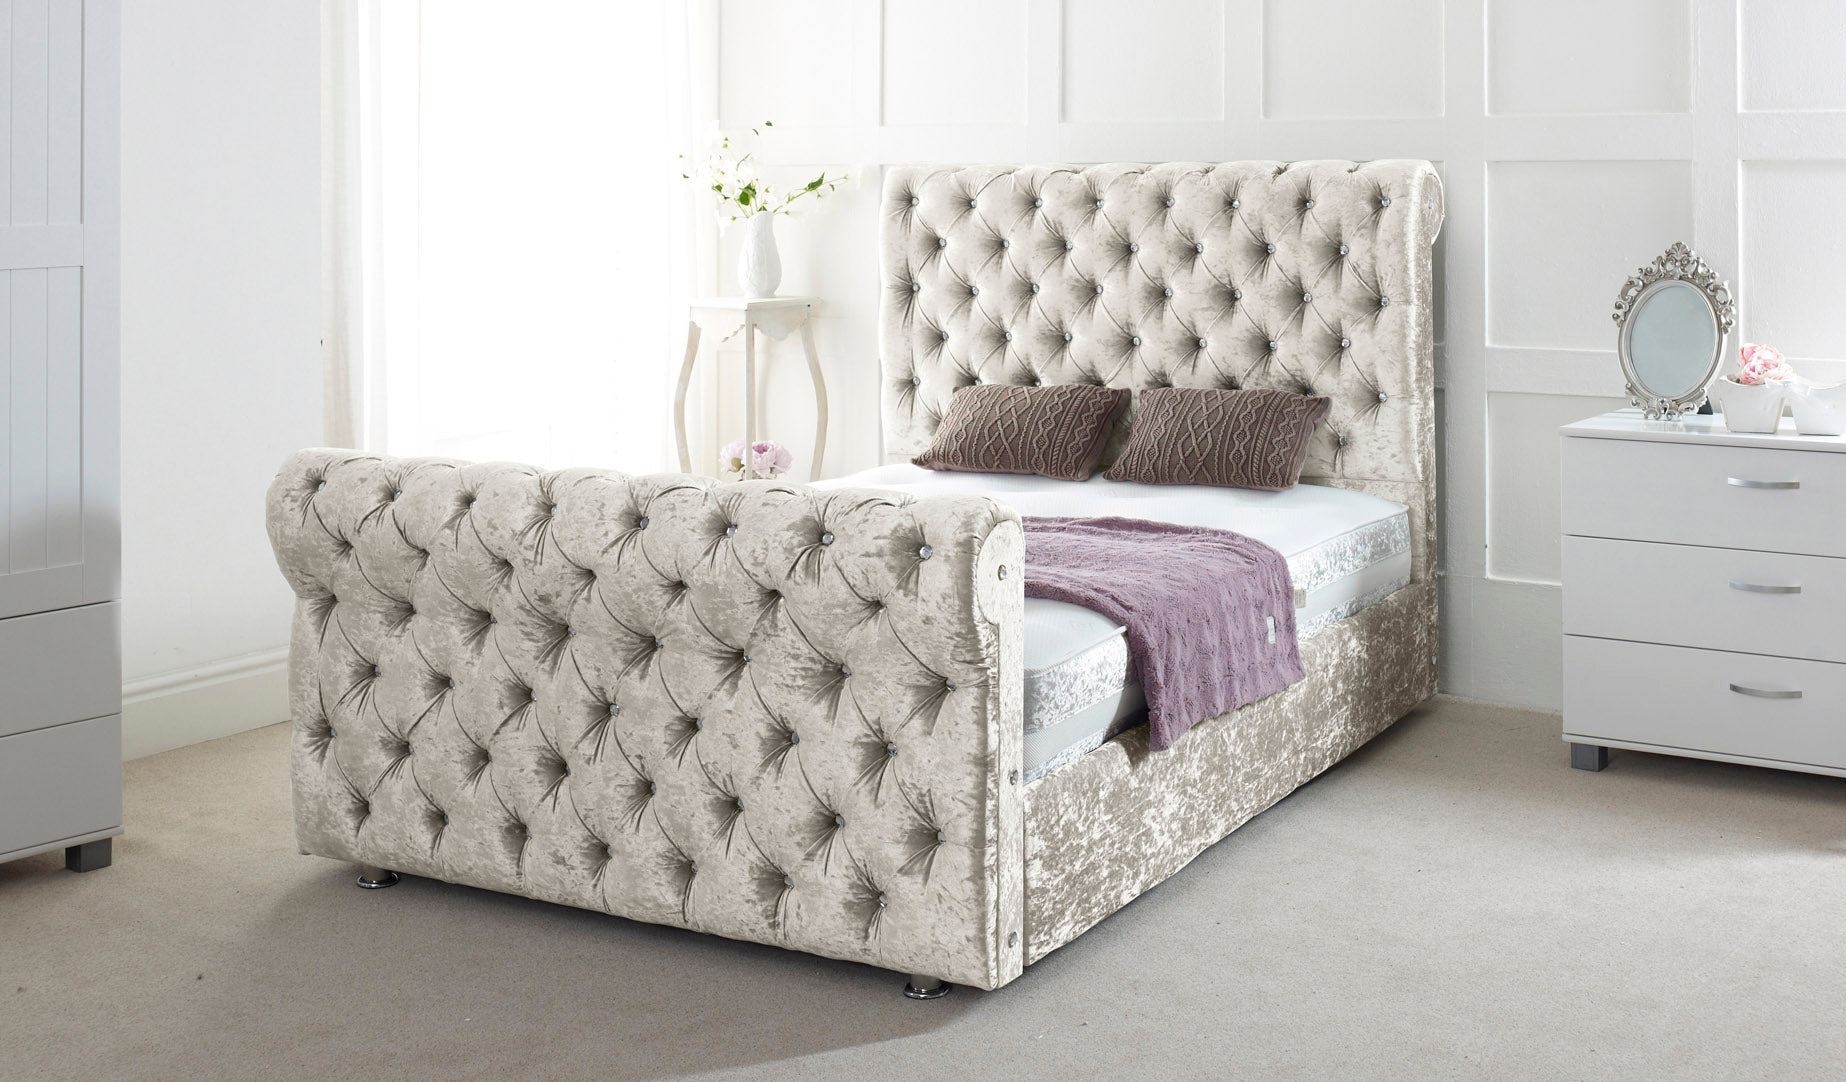 Oswald Chesterfield Sleigh Bed